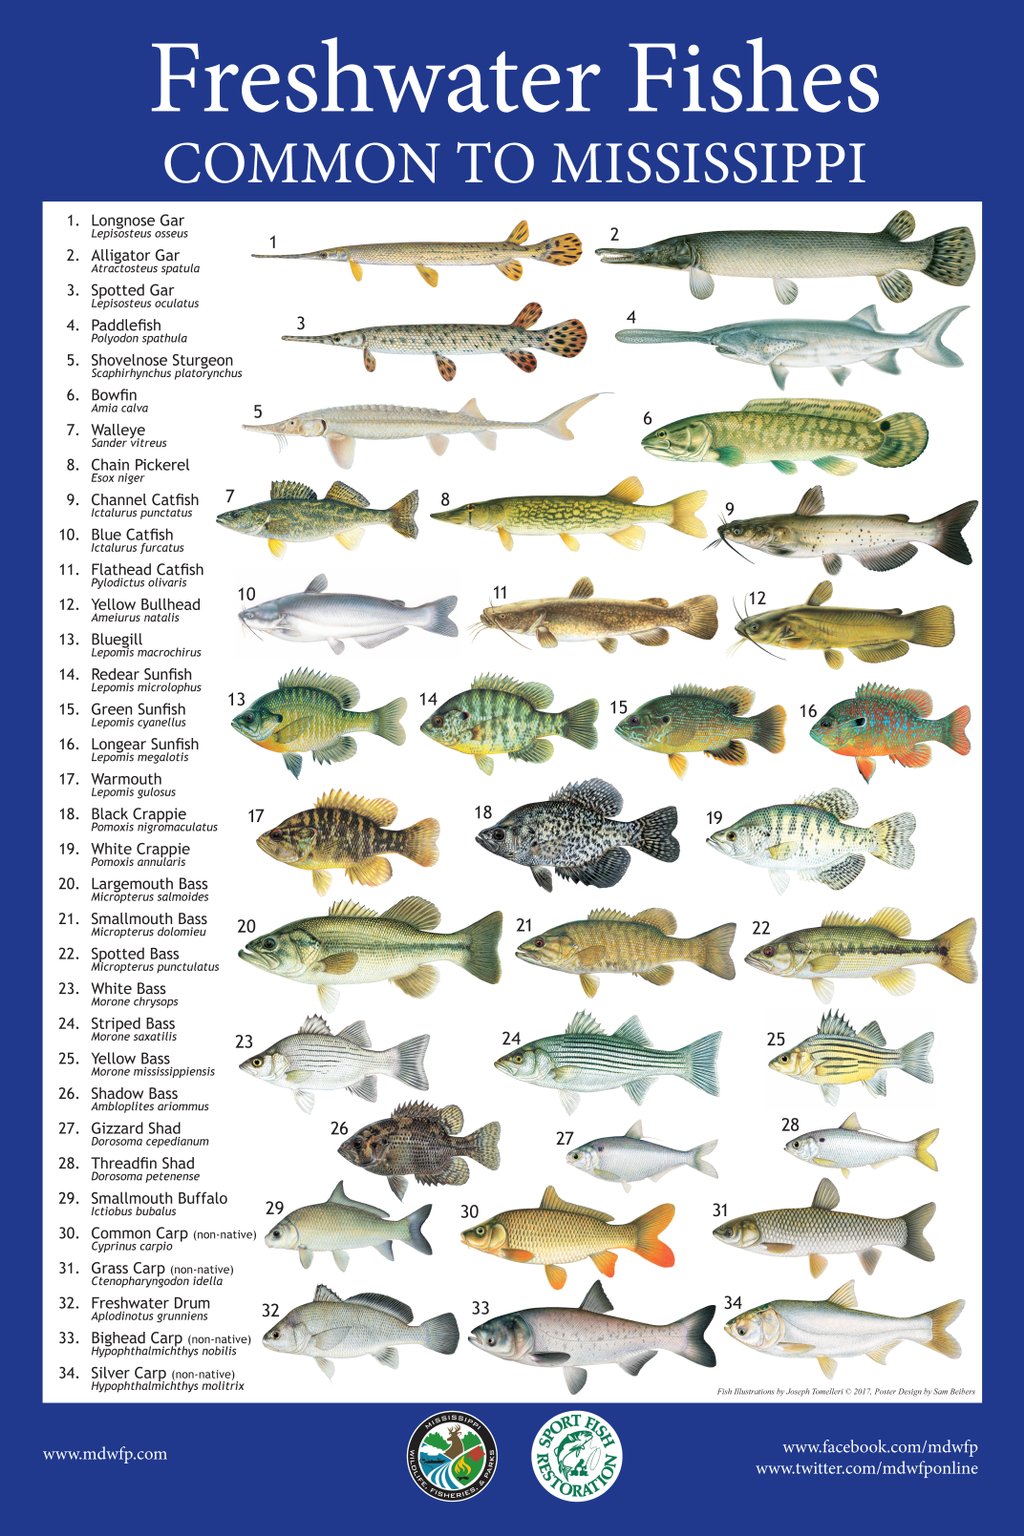 MDWFP on X: Show your love for fishing with this educational